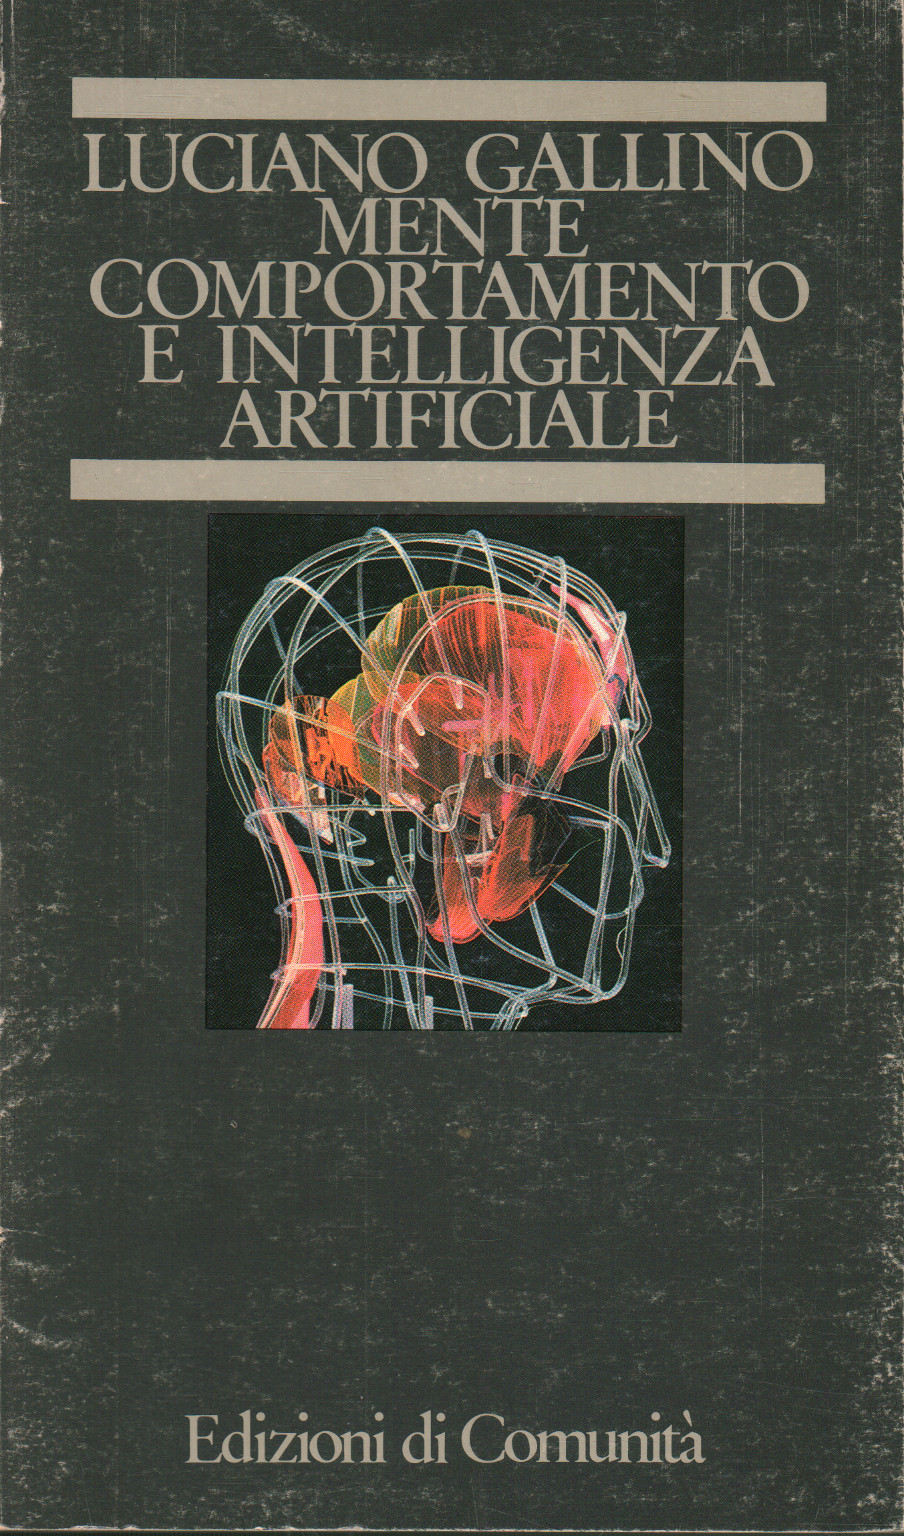 Mind, behavior and artificial intelligence, Luciano Gallino